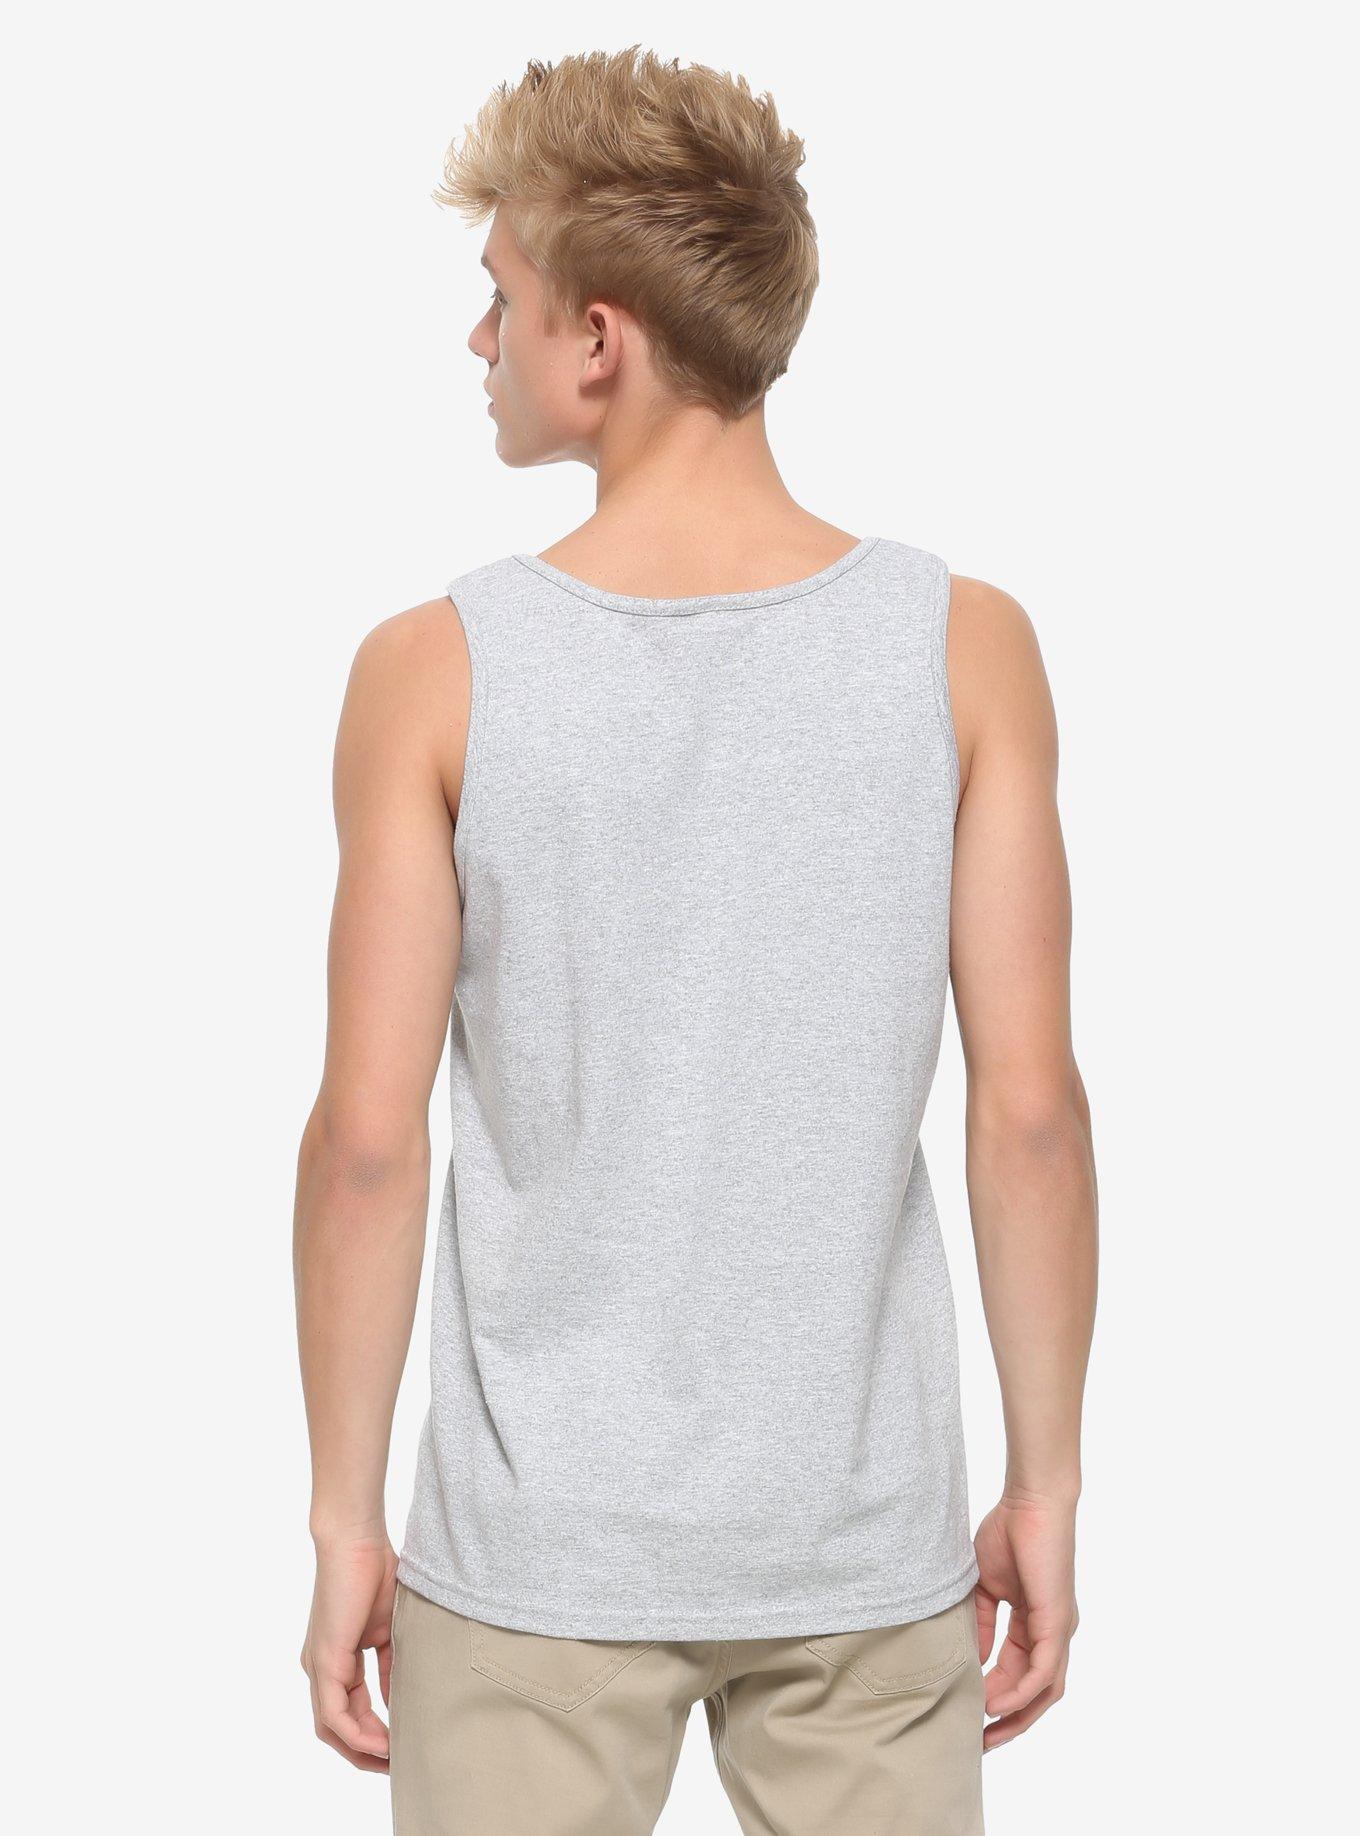 Just Here For The Pizza Alien Tank Top, GREY, alternate